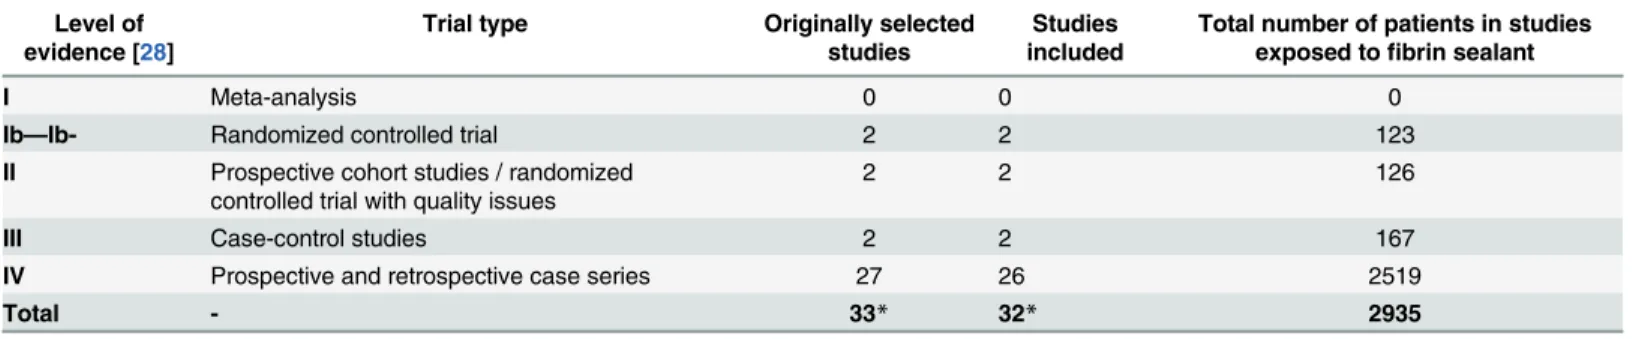 Table 4. Literature Search: Summary of Levels of Evidence of the Included Studies. Level of